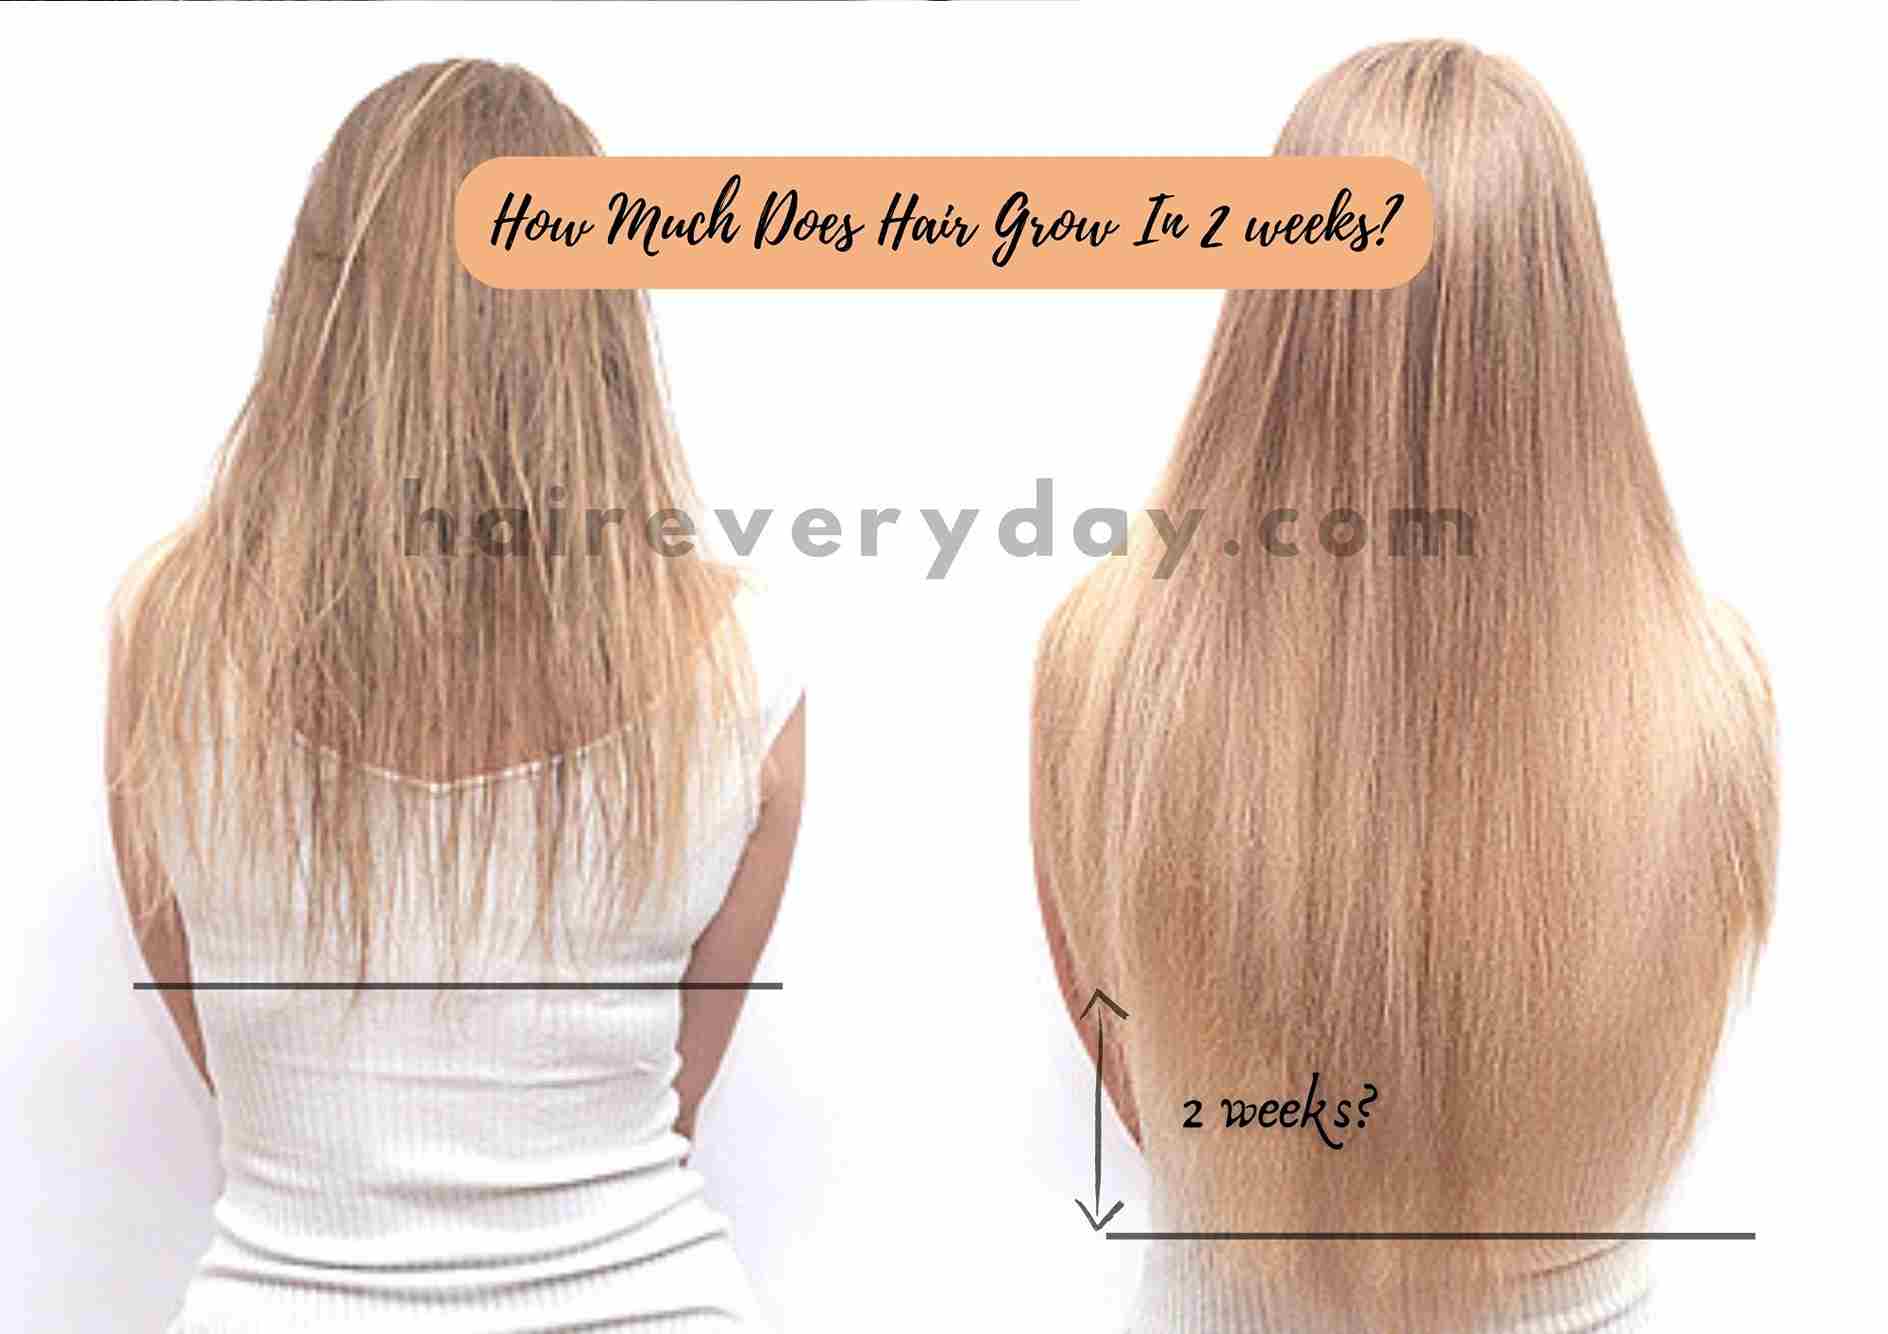 How Much Does Hair Grow In 2 Weeks | Length Comparison And Best Tips To Grow  Hair Faster! - Hair Everyday Review